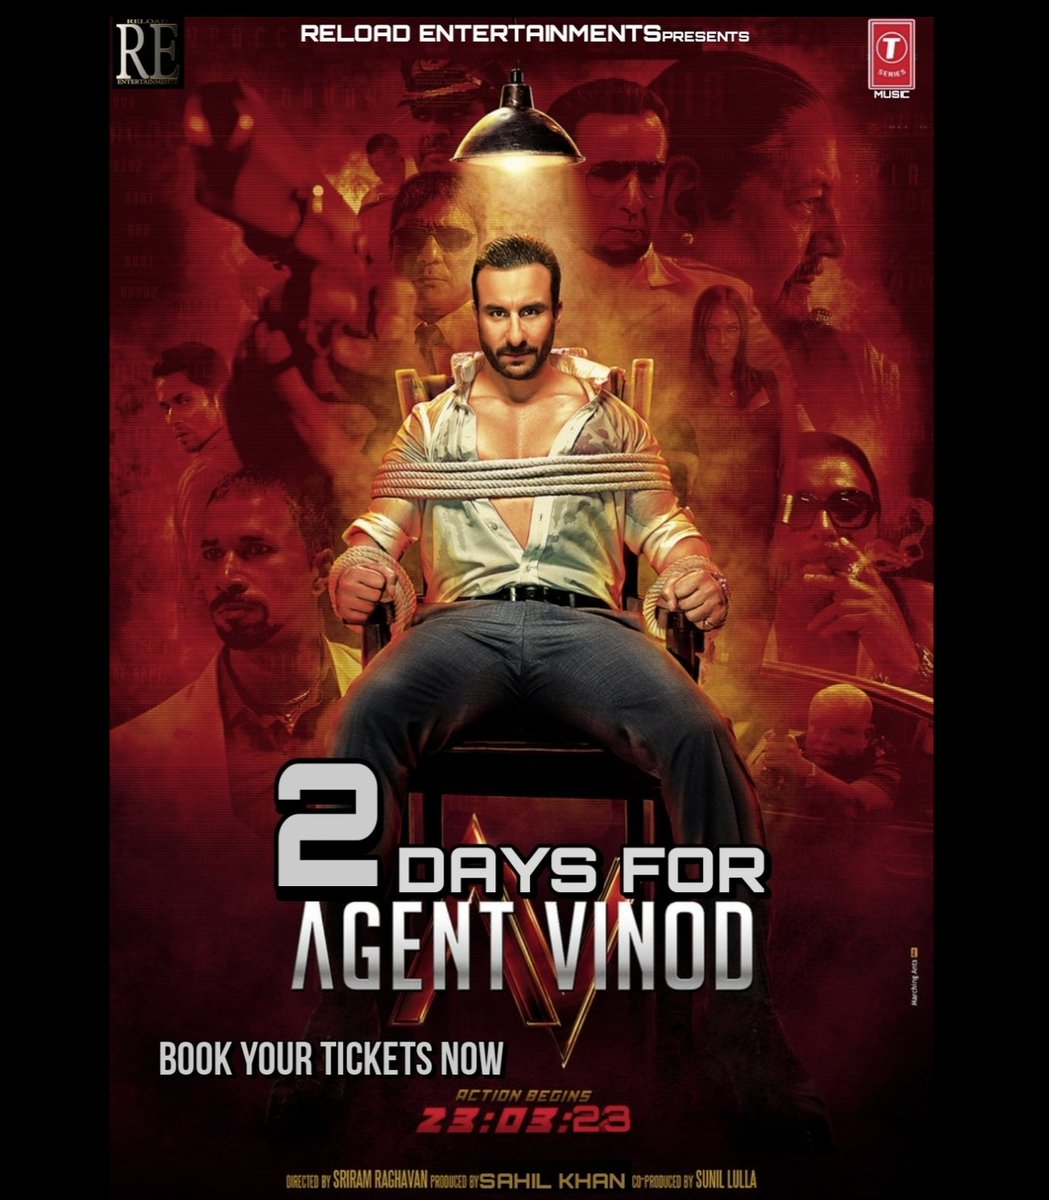 2 Days to go for #AgentVinod 🔥
.
.Book Your Tickets Now on Bookmyshow
.
.
.Celebrate #AgentVinod with #RE only on this 23 March in Cinemas near you.
.
.
.#SaifAliKhan @kareenakapoorkhan #SriramRaghavan